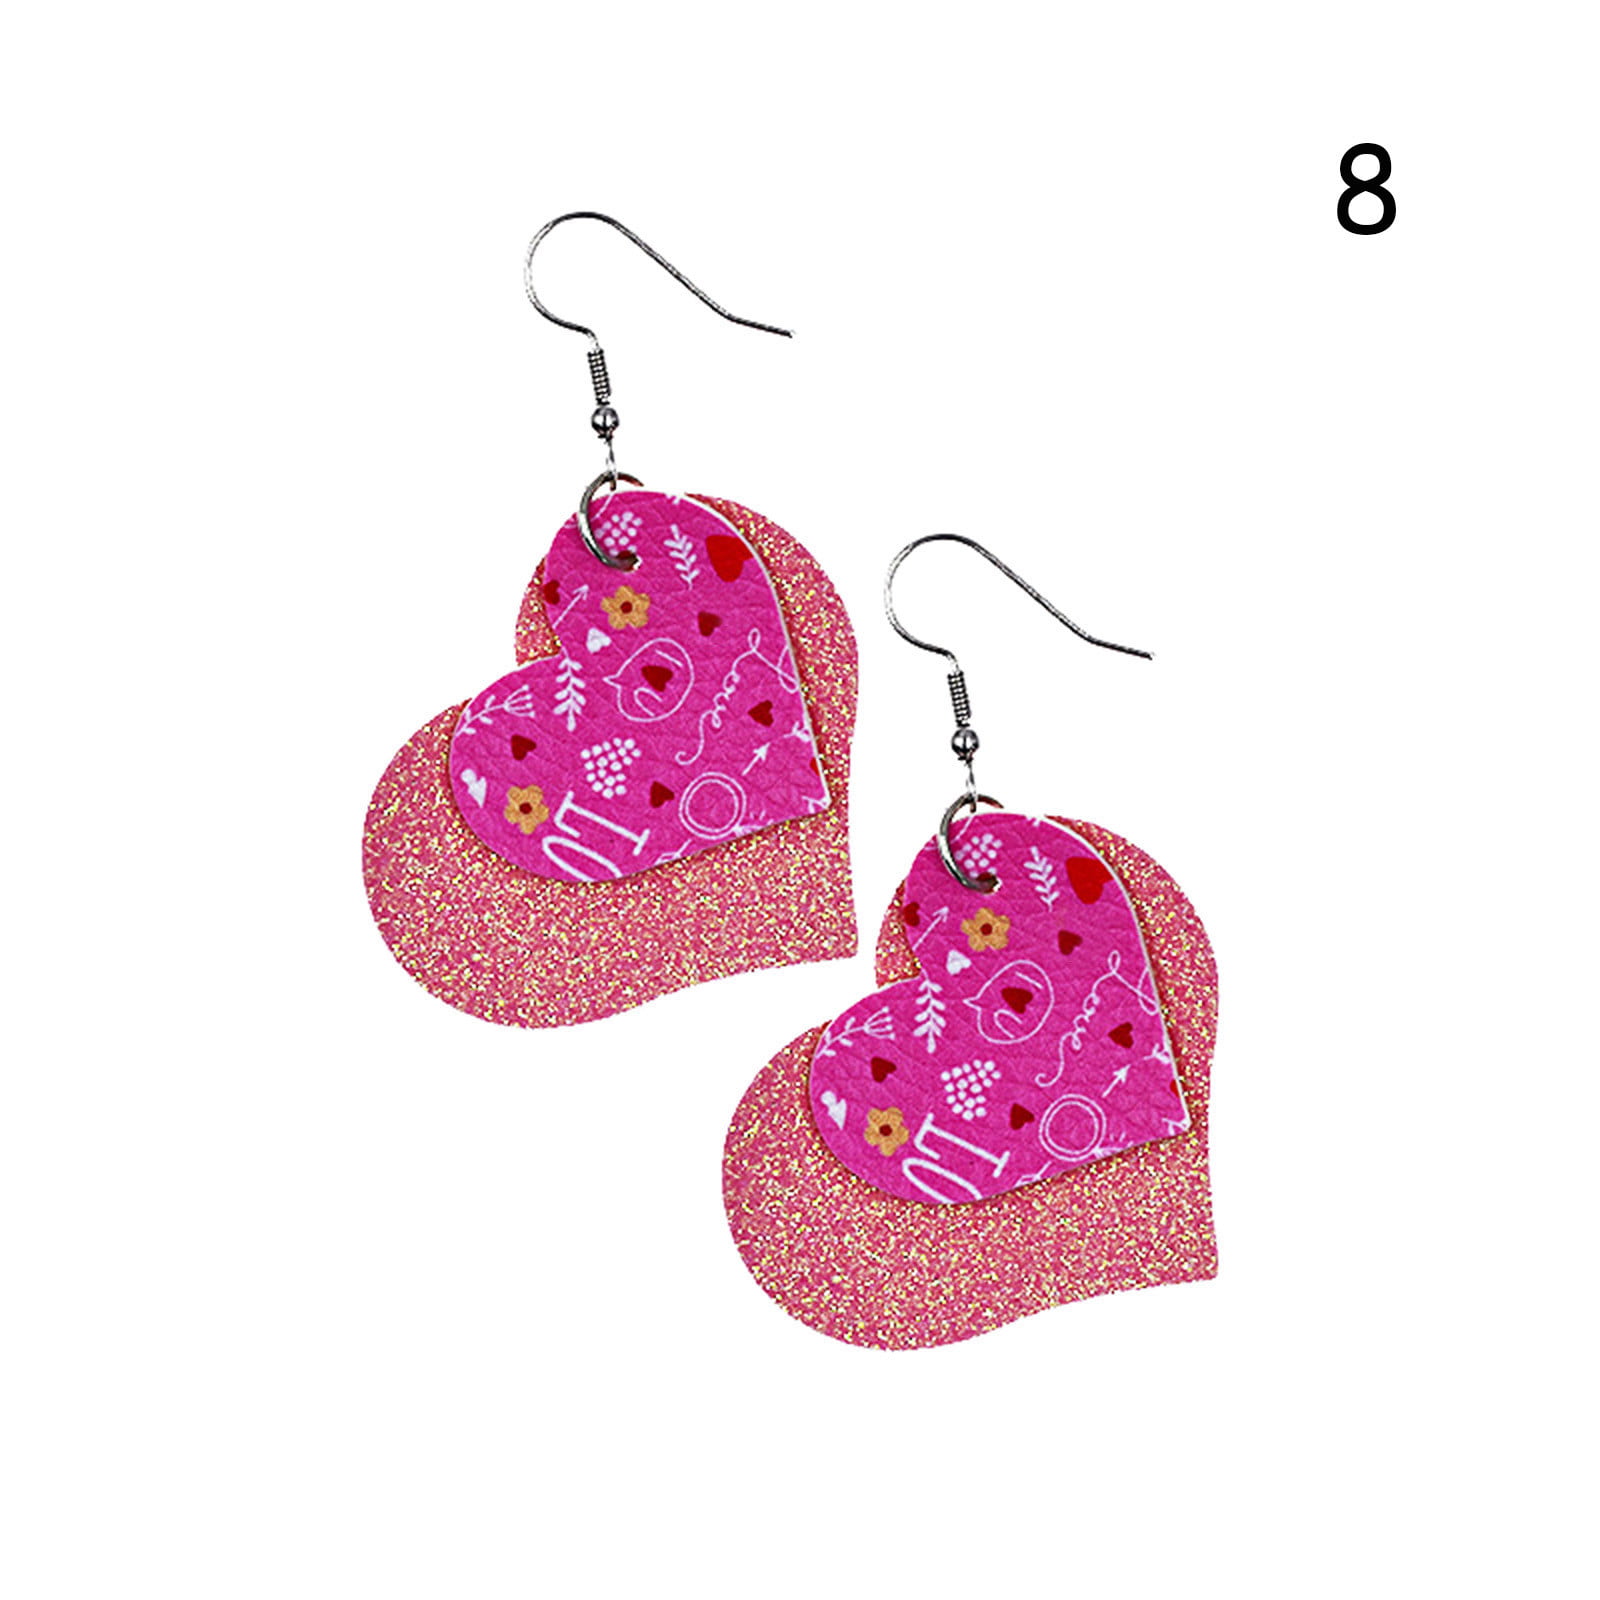 Valentine’s Day Hearts Faux Leather Earrings